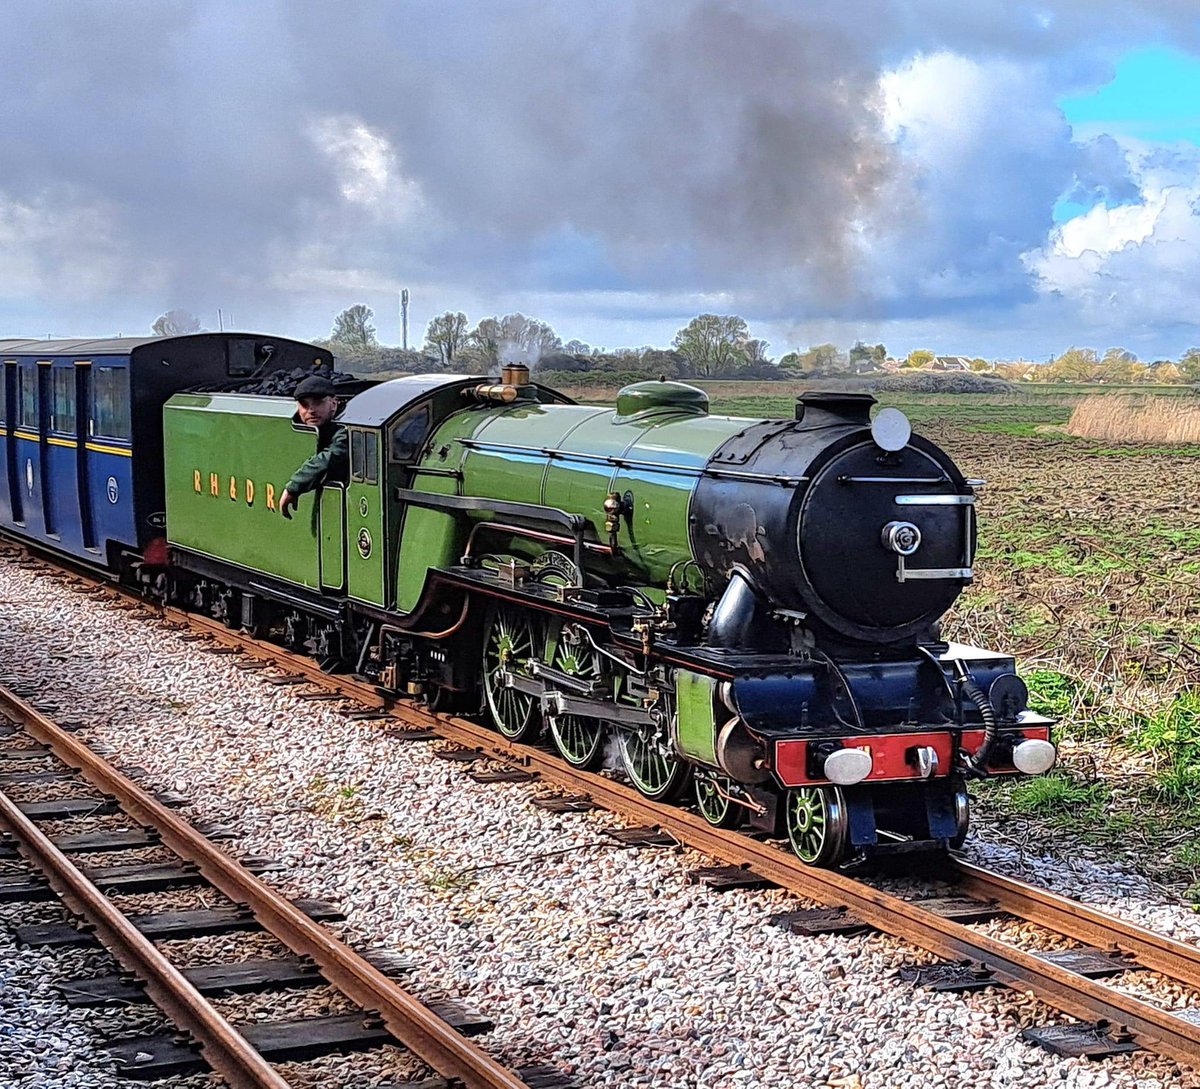 Trains running tomorrow on our green timetable with 4 locomotives in steam. See www. rhdr.org.uk for timetable, to book tickets or learn more of all the things to see at each station.